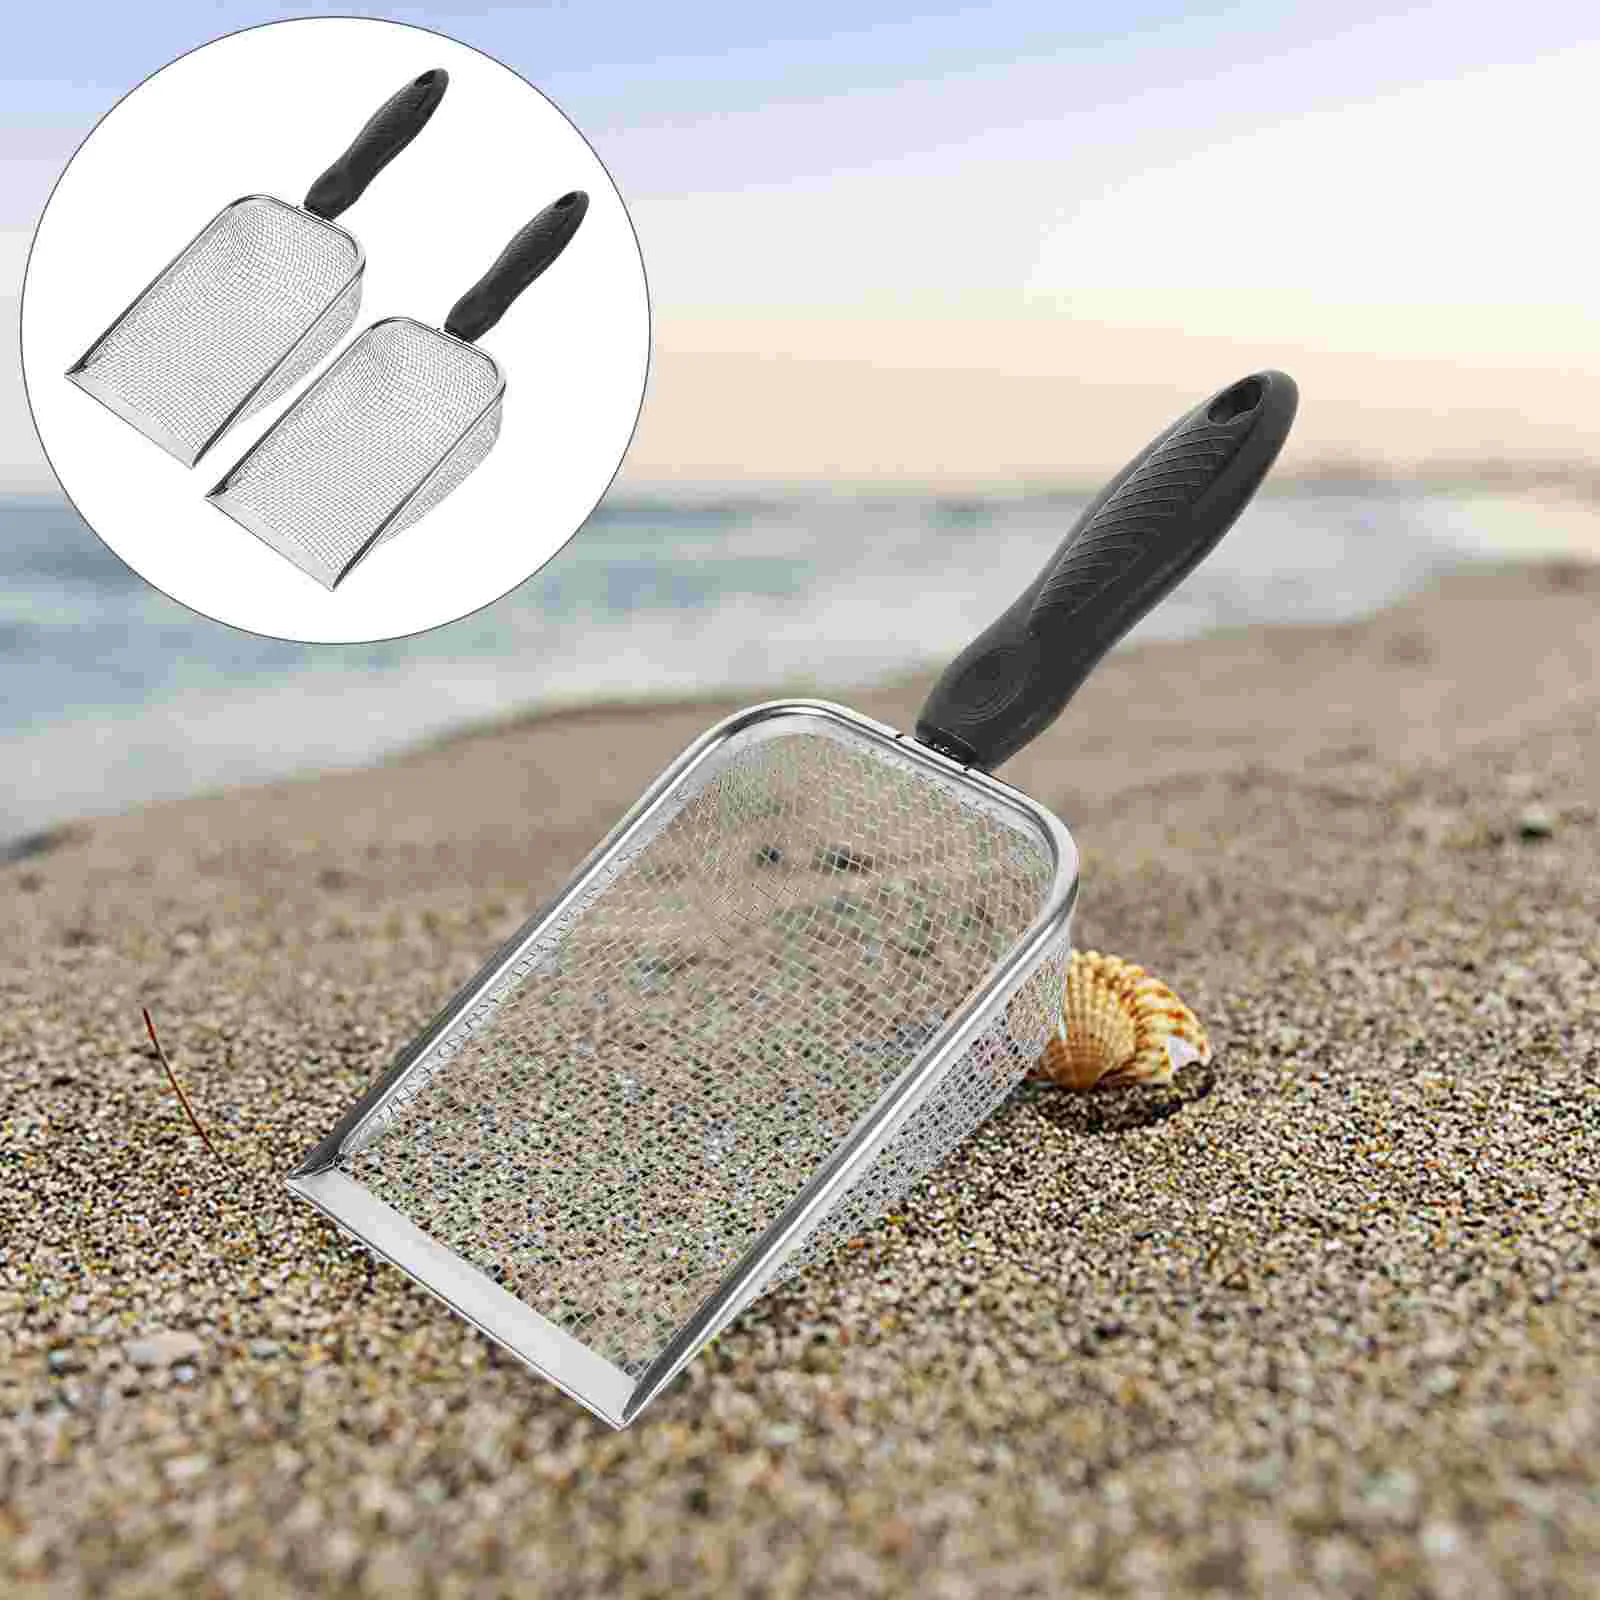 

2 Pcs Beach Cleaning Tools Handheld Mesh Sand Portable Food Stainless Steel Filter Dig Convenient Play Pet Litter